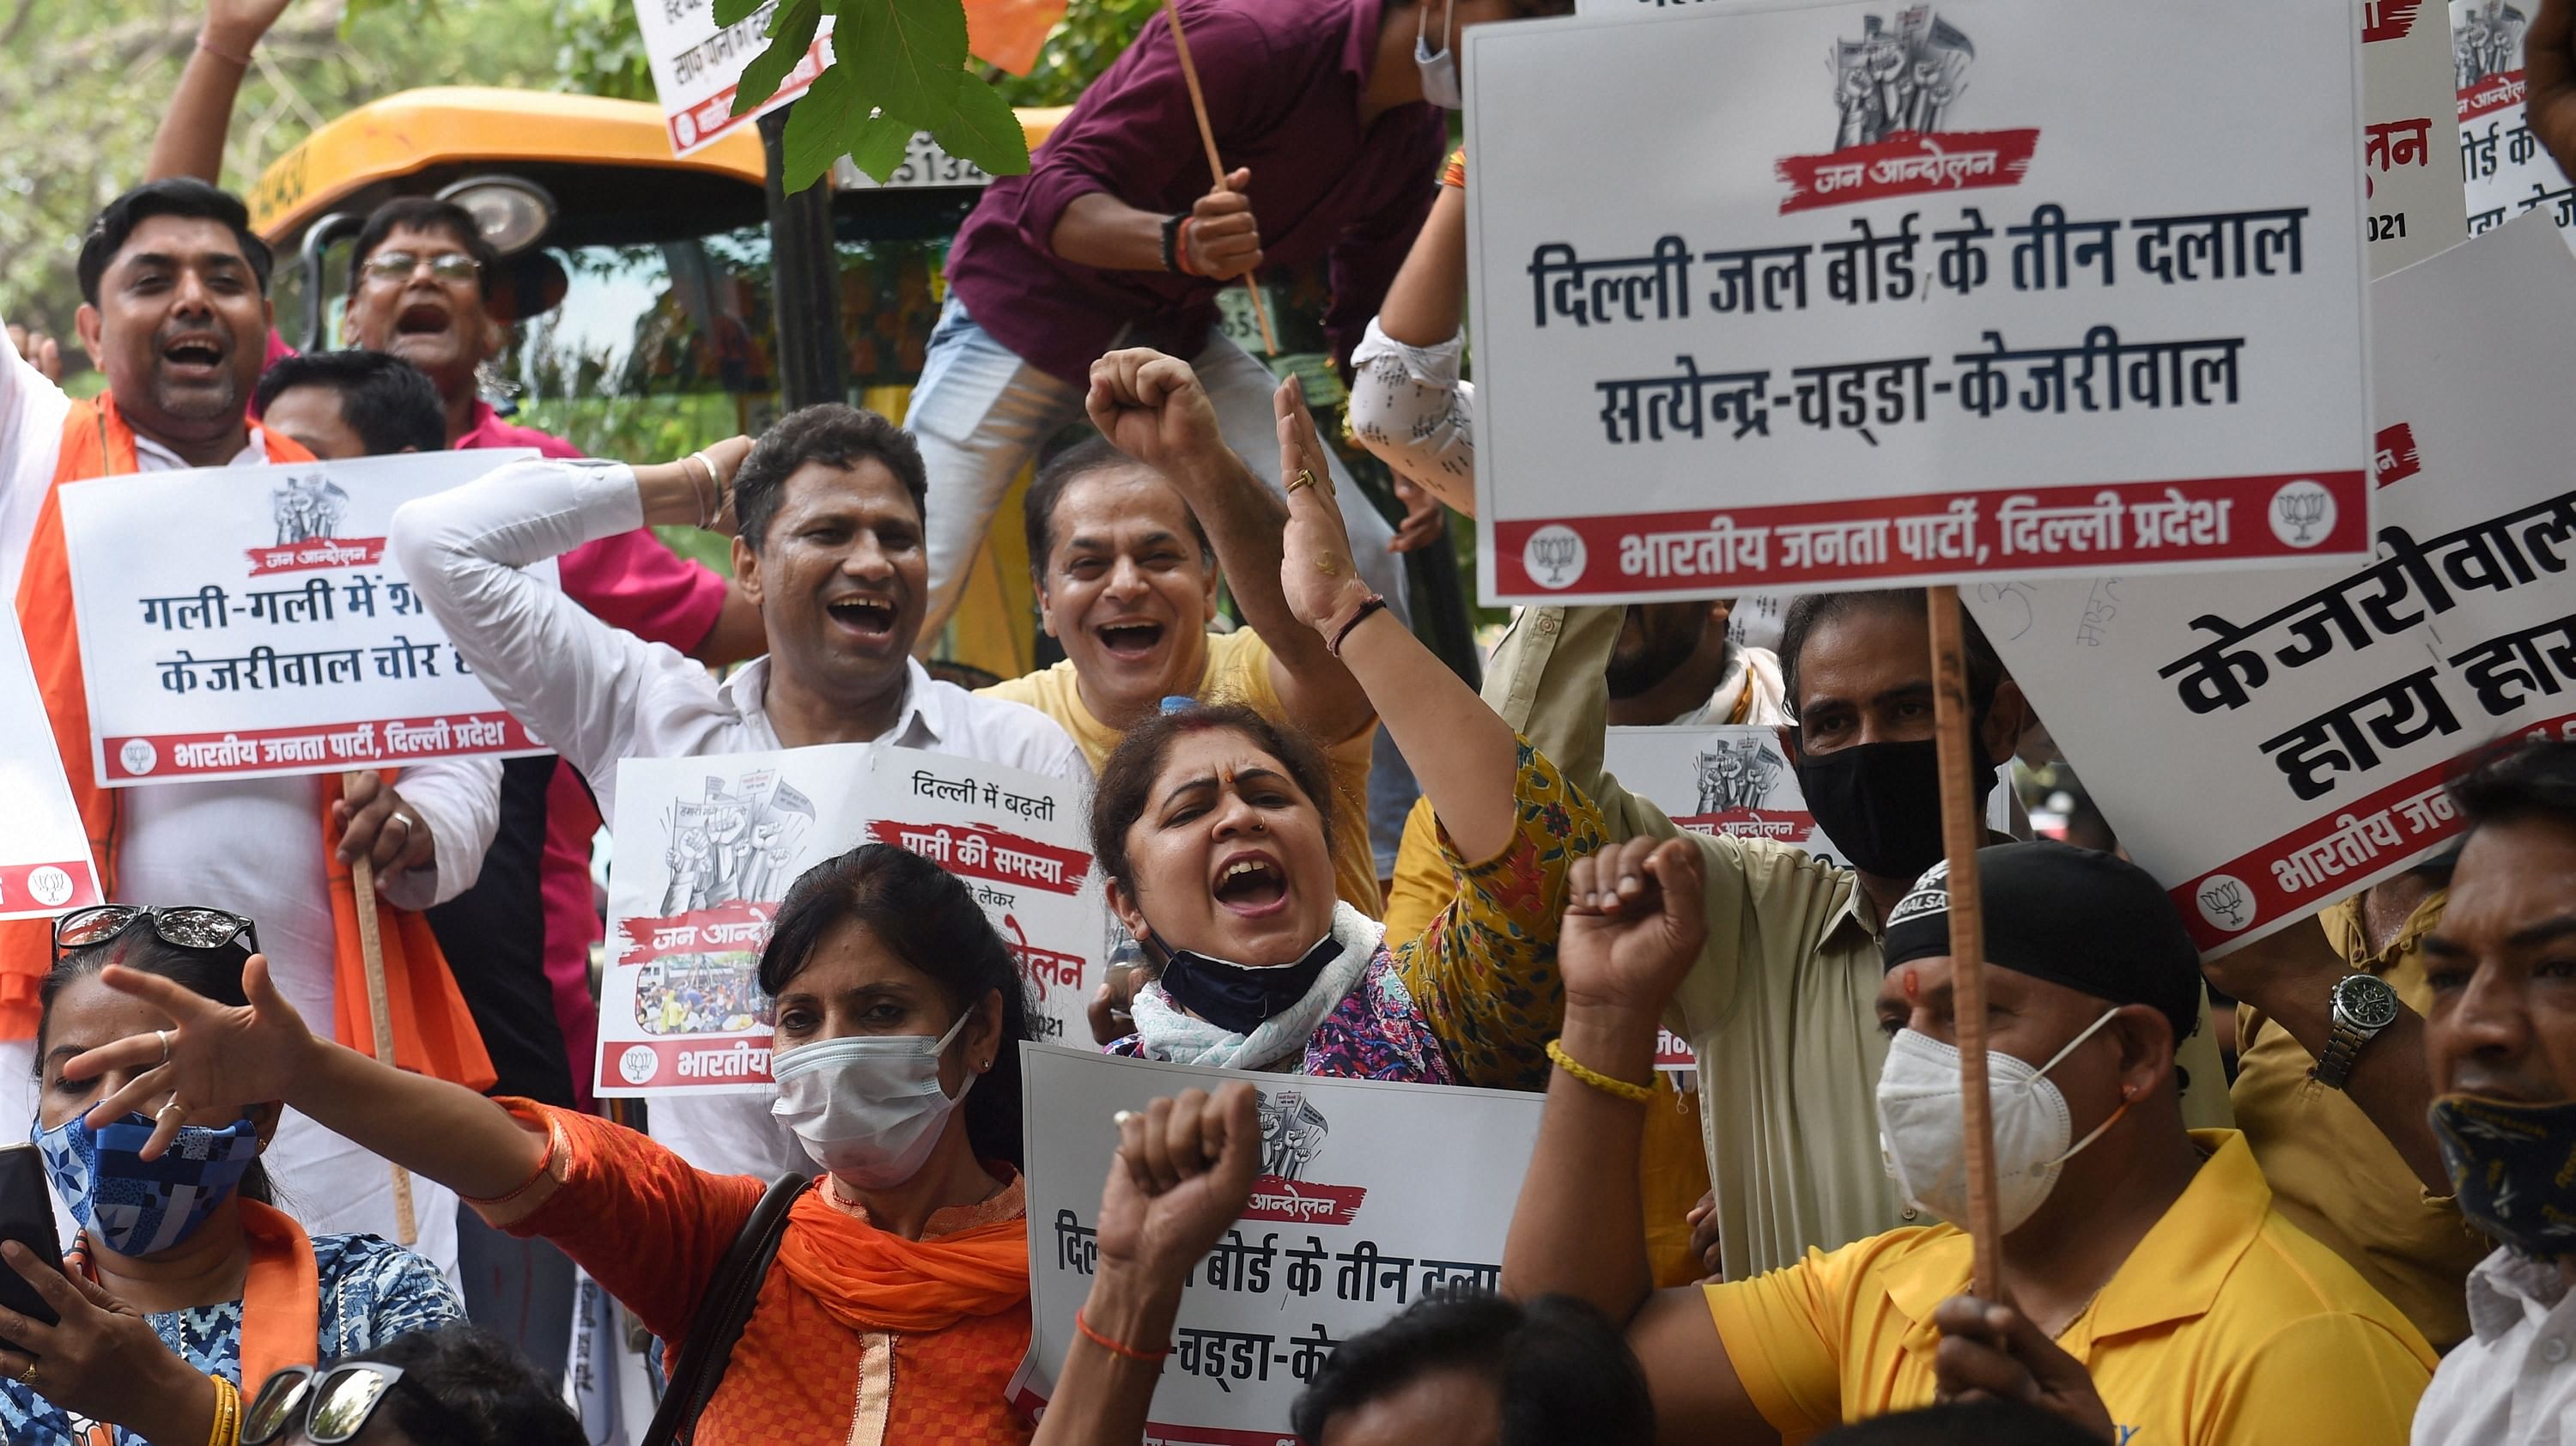 BJP workers during a protest over water crisis and an alleged scam, outside Delhi Jal Board Chairman Satyendar Jain's residence in New Delhi. Credit: PTI Photo